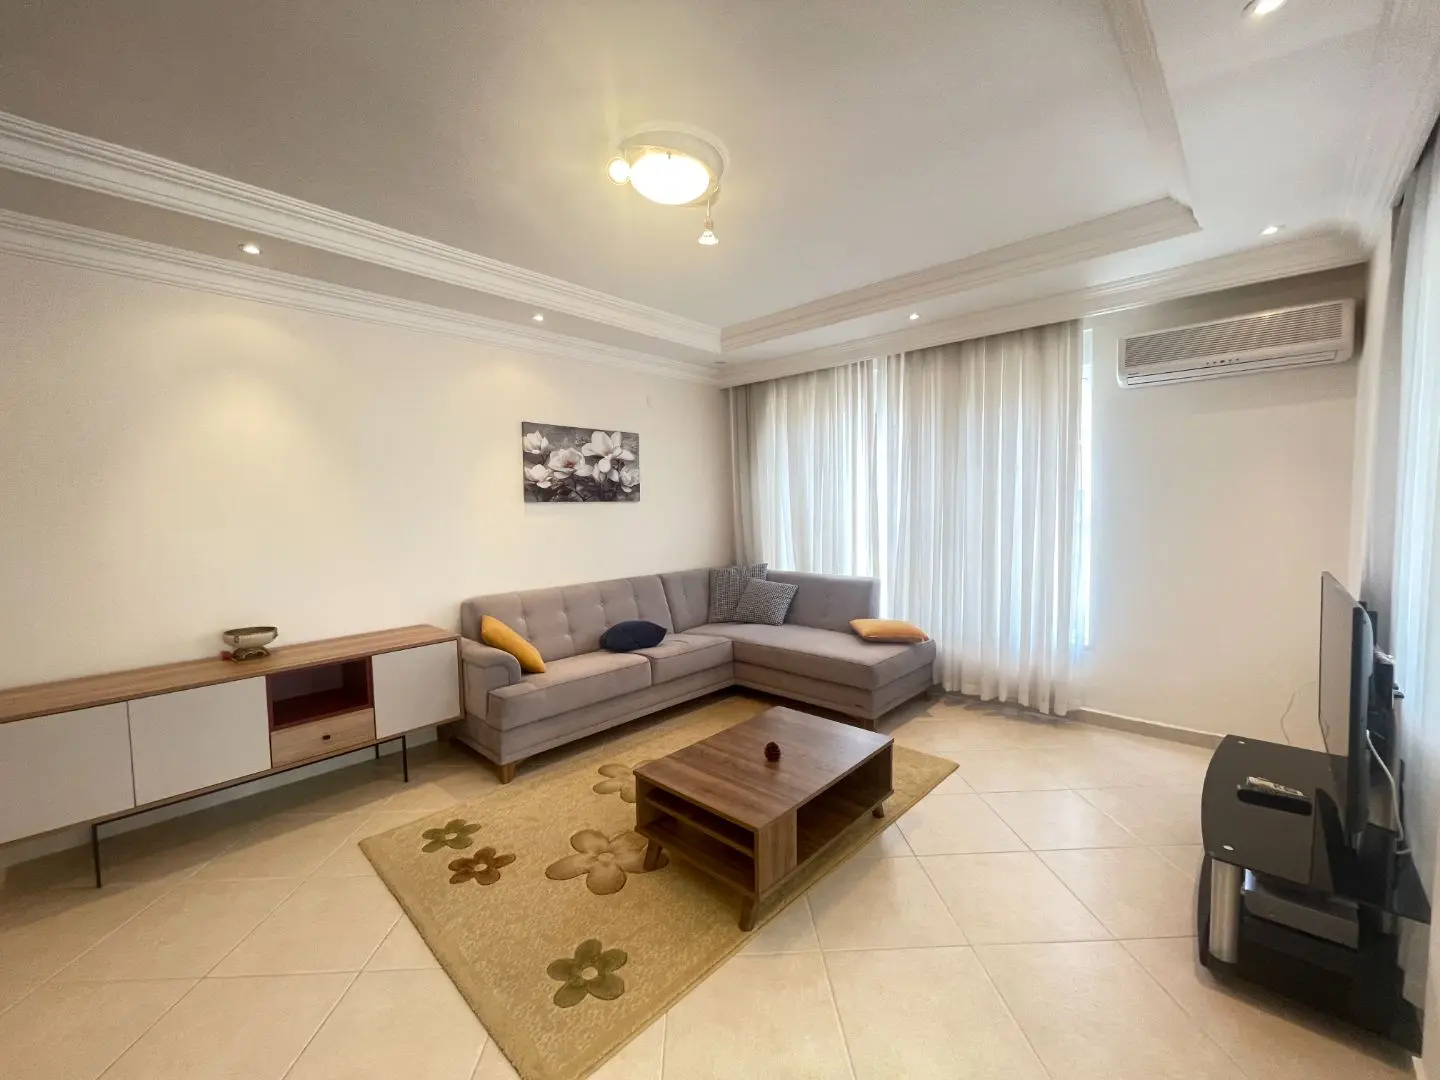 APARTMENT 2+1 WITH FURNITURE AND APPLIANCES IN THE CENTER OF ALANYA